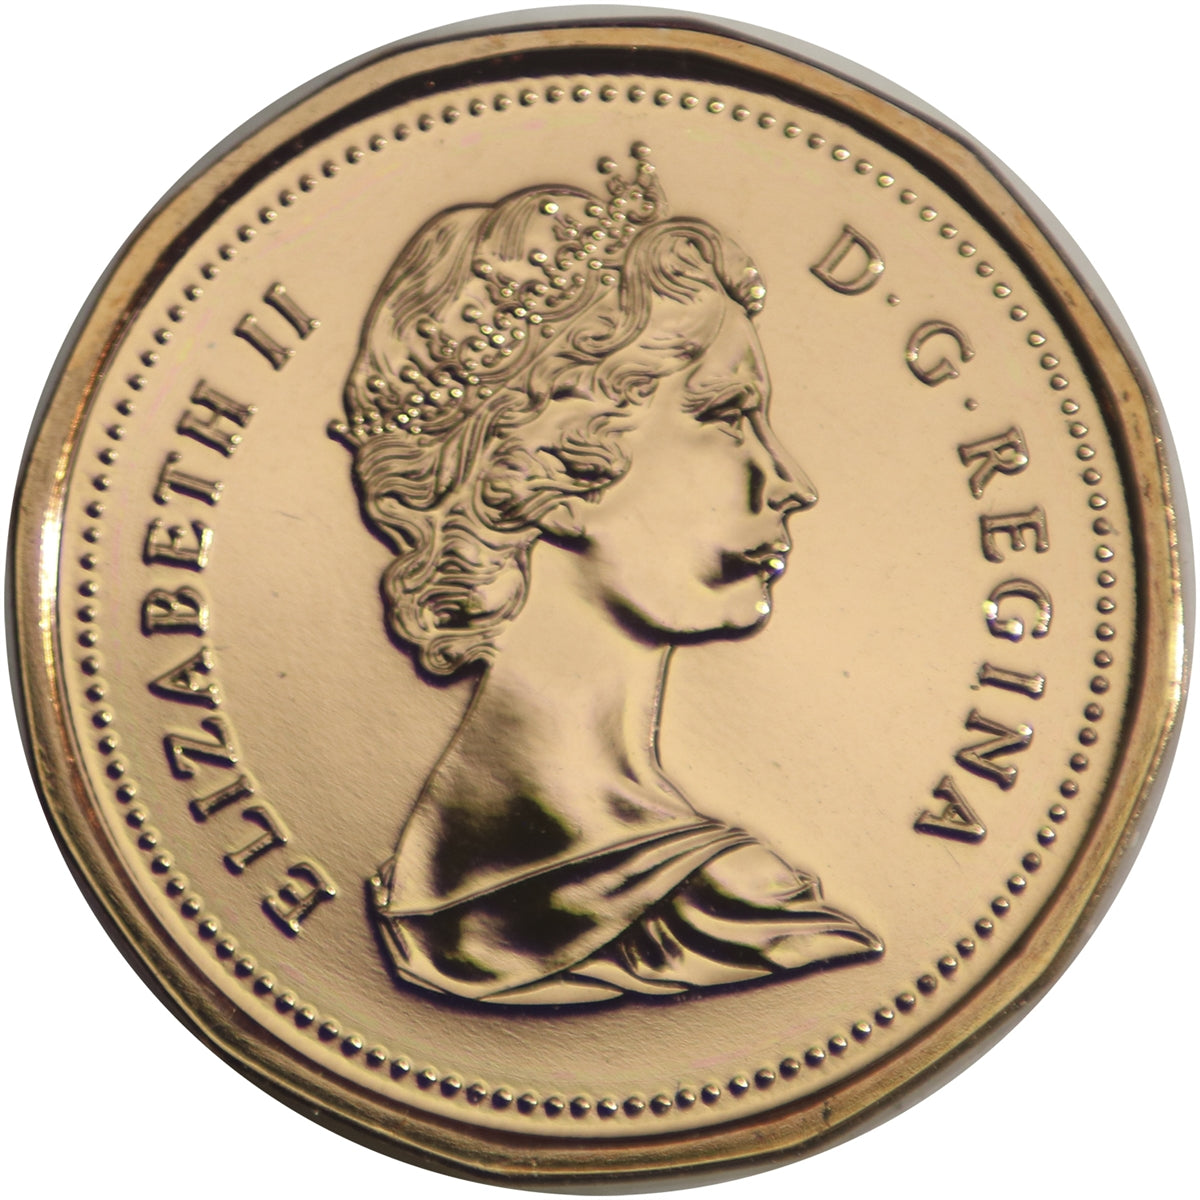 1985 Canada 1-cent Proof Like